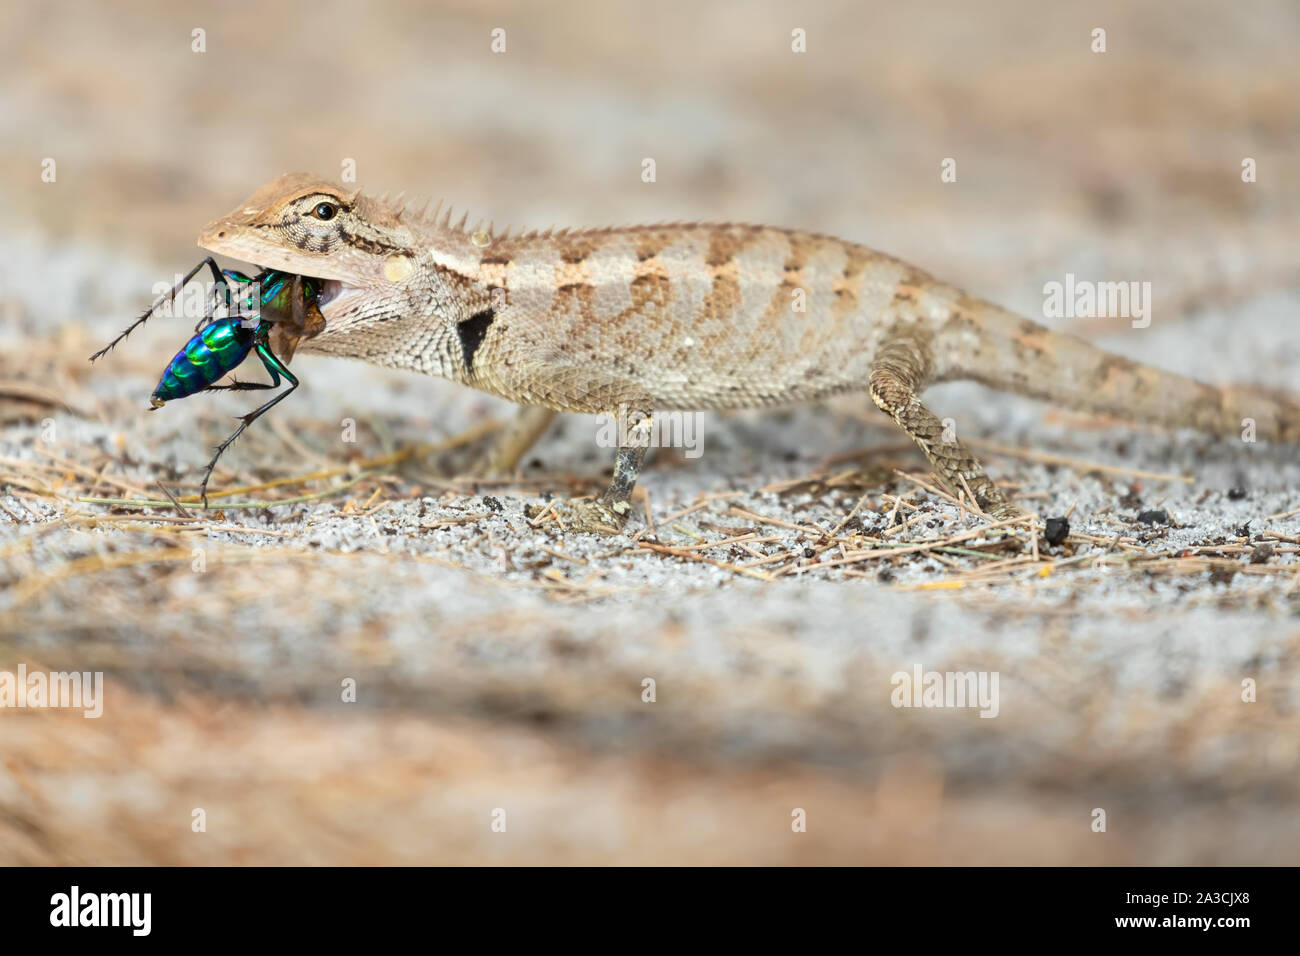 A wild lizard from Agamidae family is eating a colorful wasp on the sand. Thailand Stock Photo